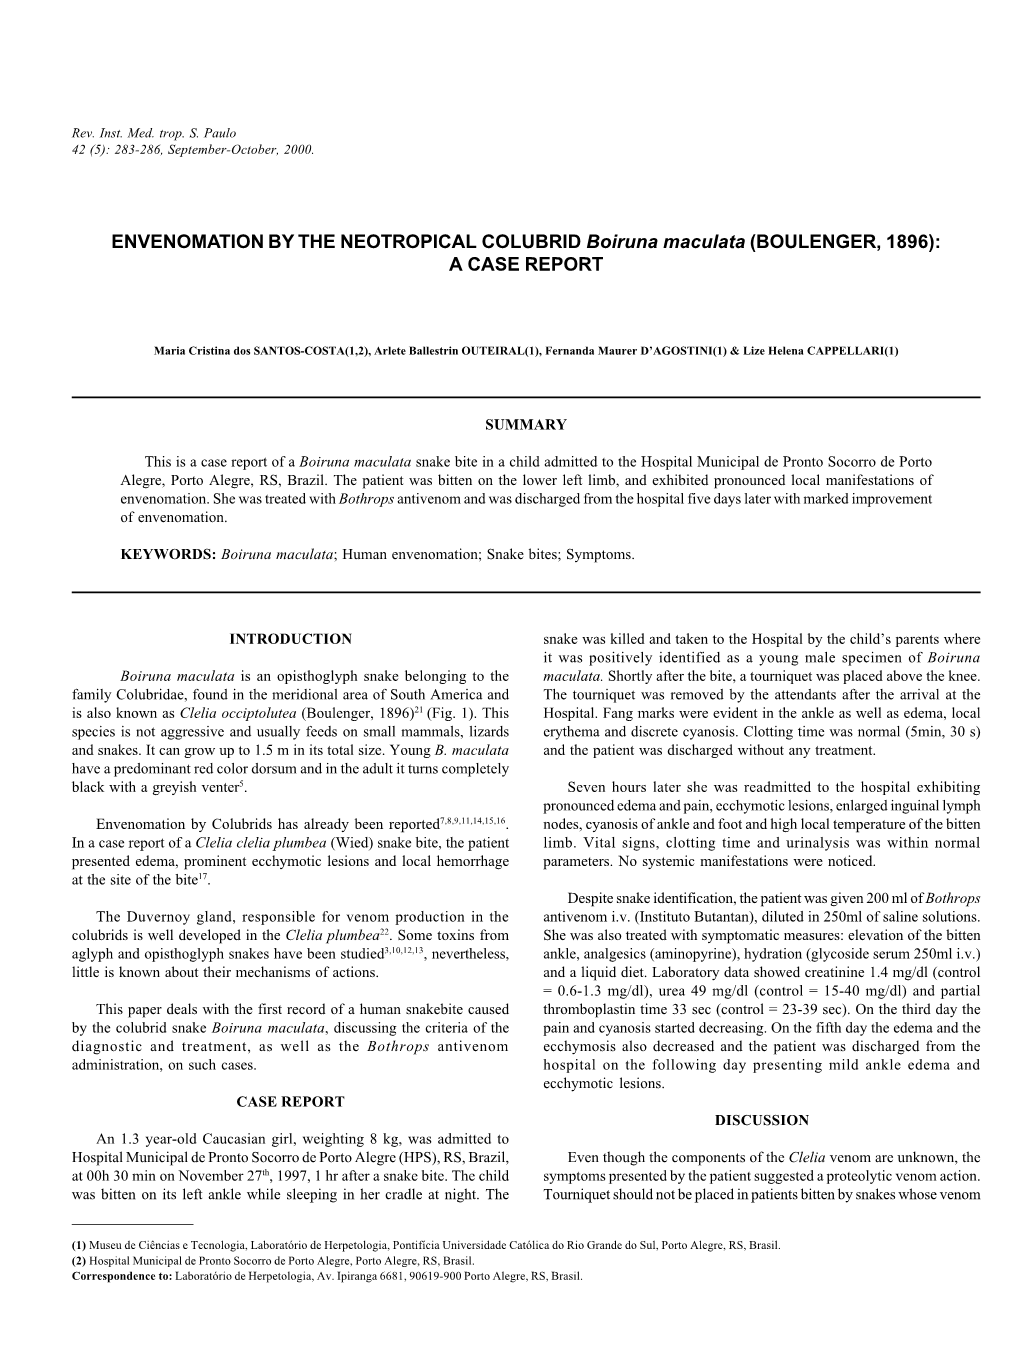 ENVENOMATION by the NEOTROPICAL COLUBRID Boiruna Maculata (BOULENGER, 1896): a CASE REPORT